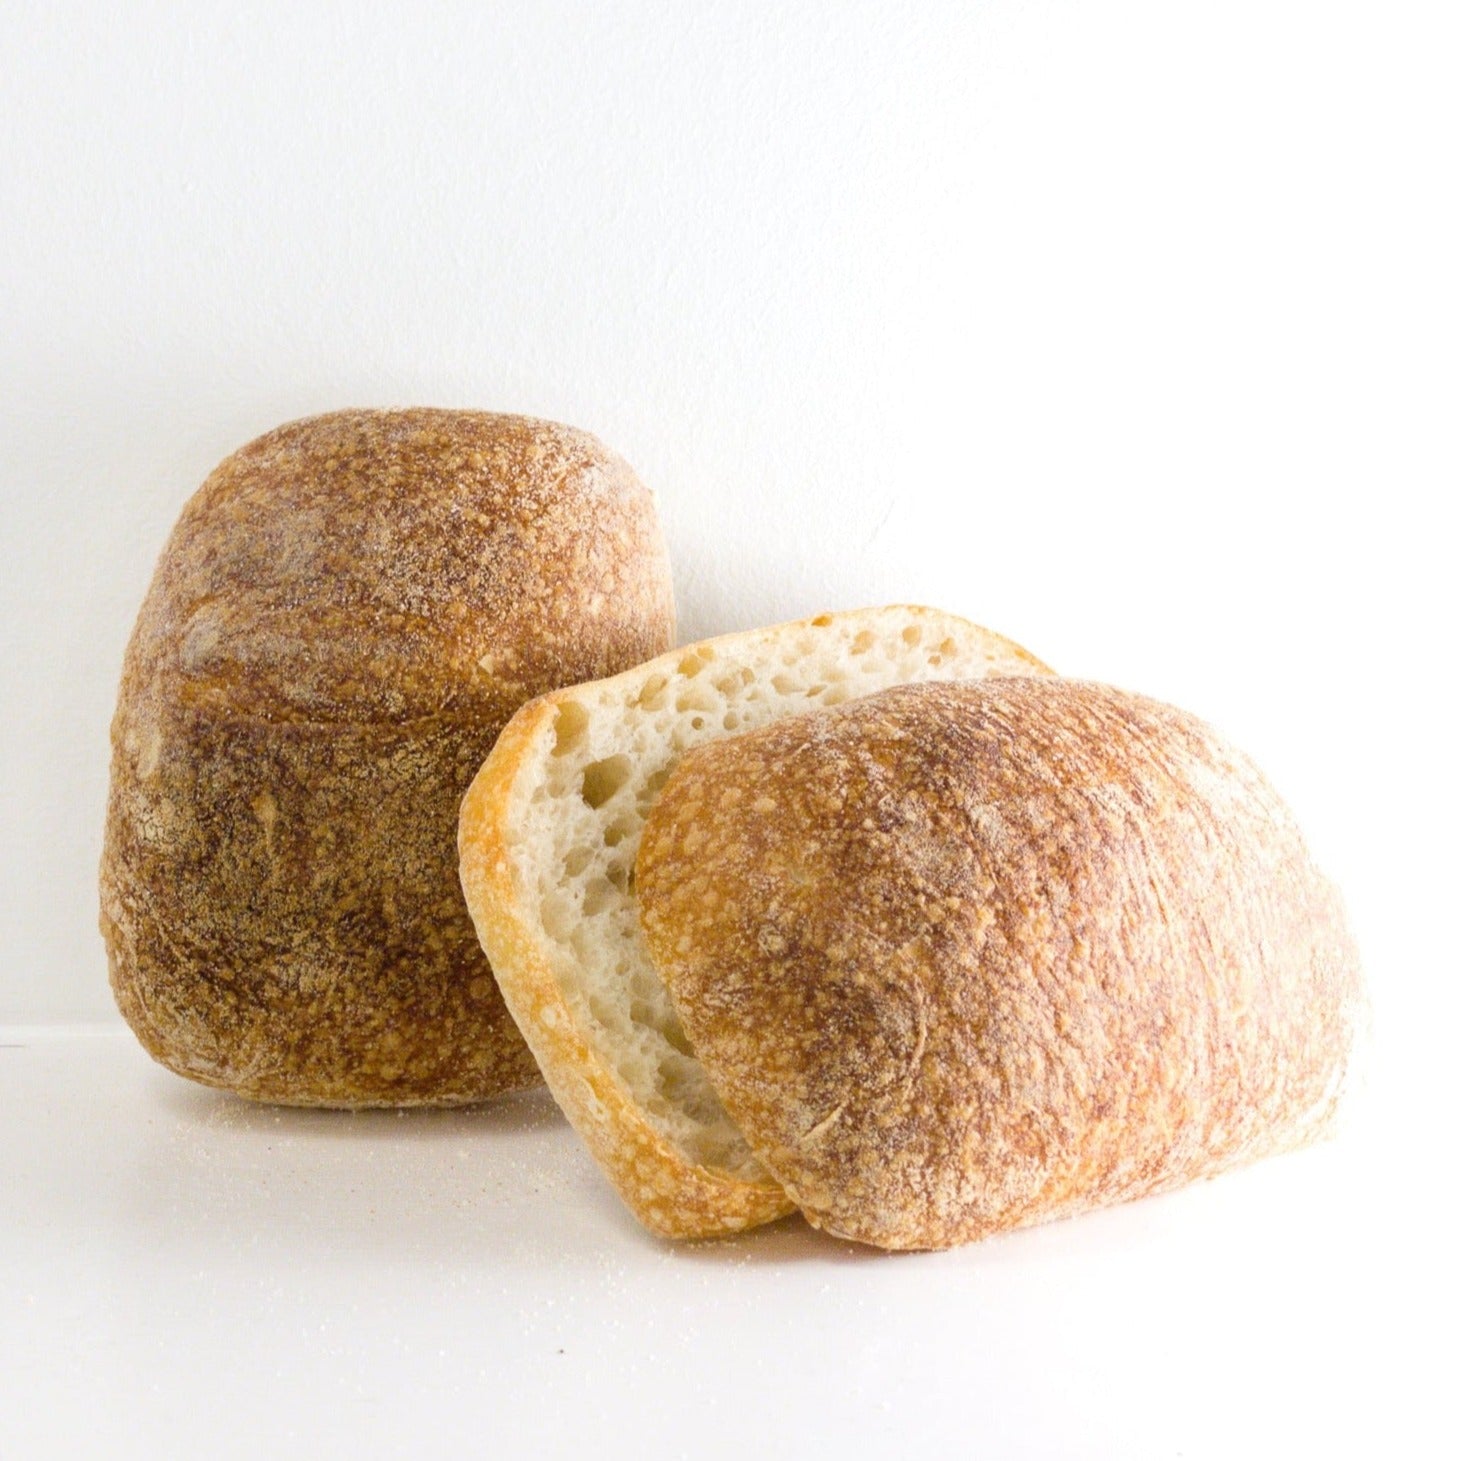 an image of two ciabatta rolls. one of the rolls is whole. the other has been sliced in half